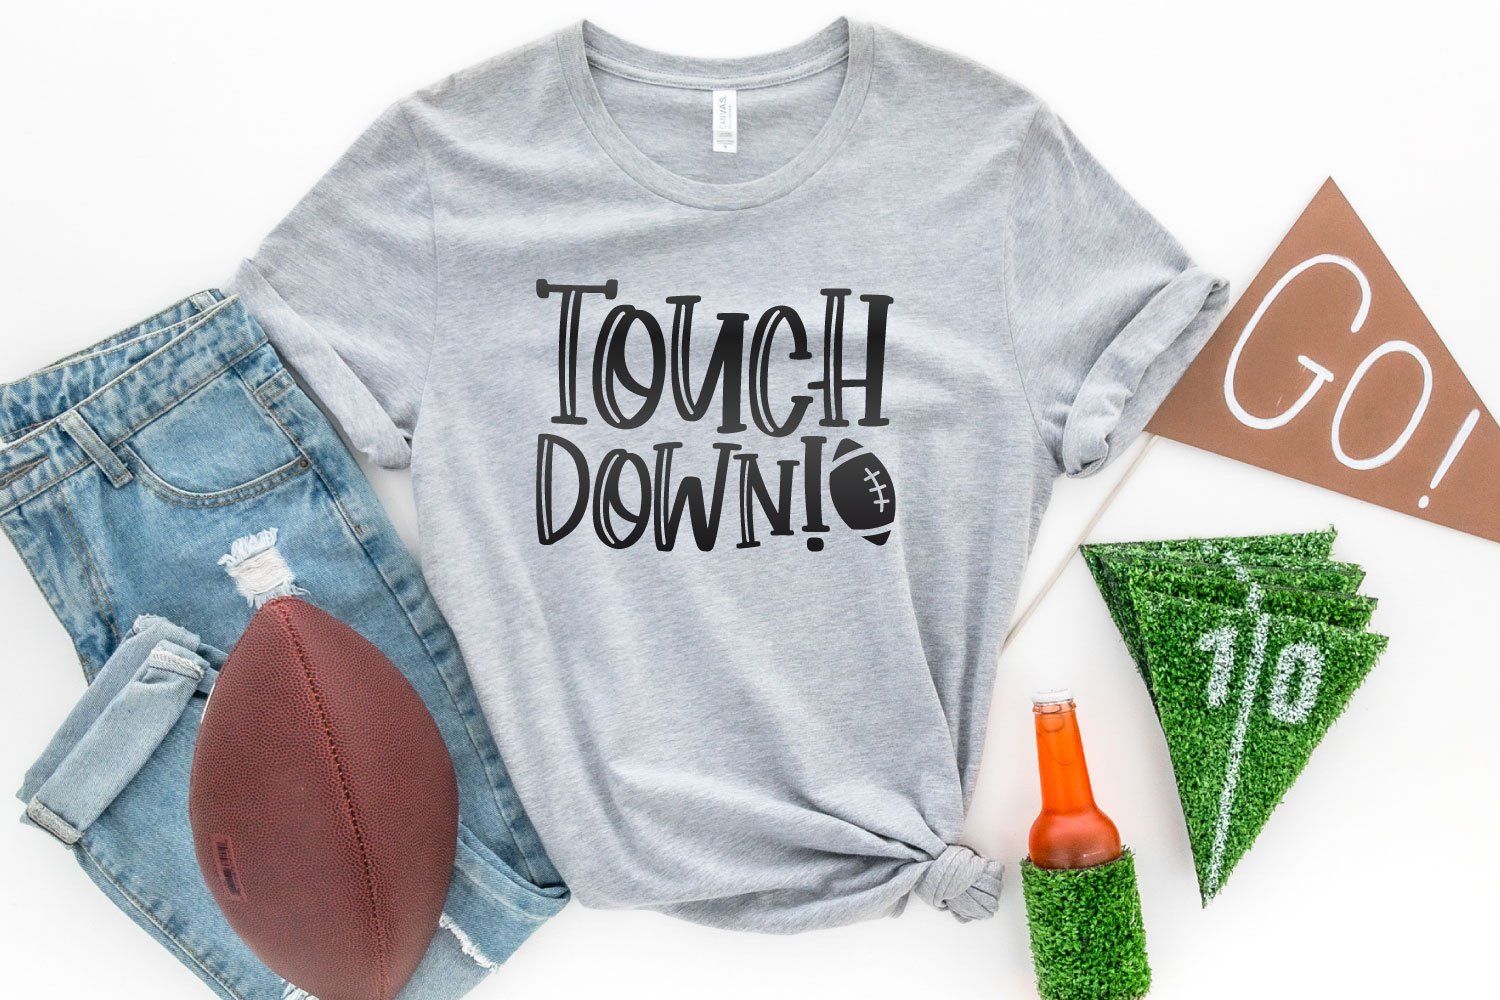 Touchdown SVG on a gray shirt with football accessories